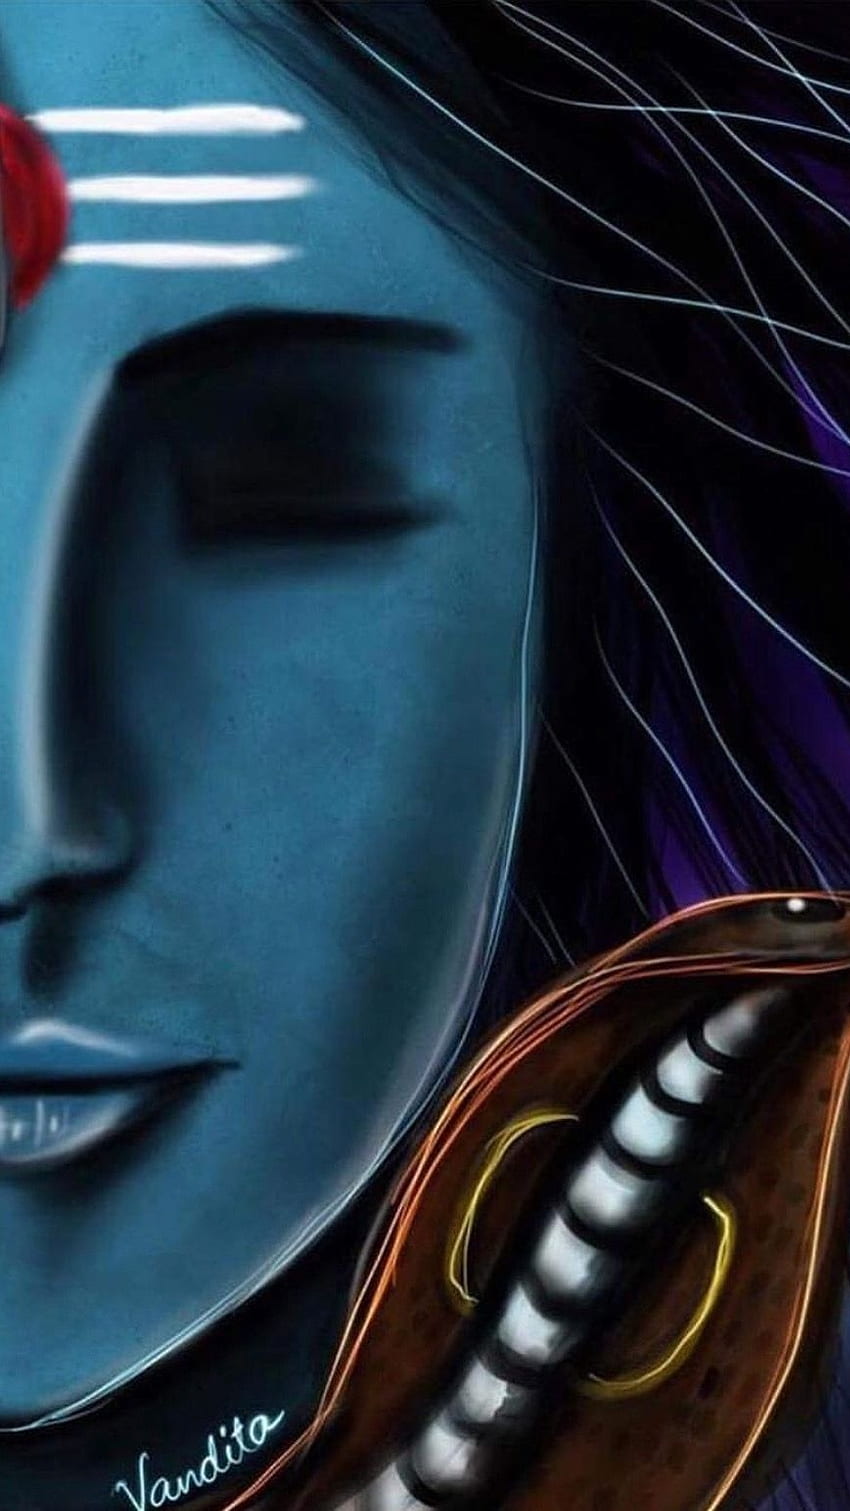 What Is The Meaning Behind The Symbols Of Lord Shiva | Times of India